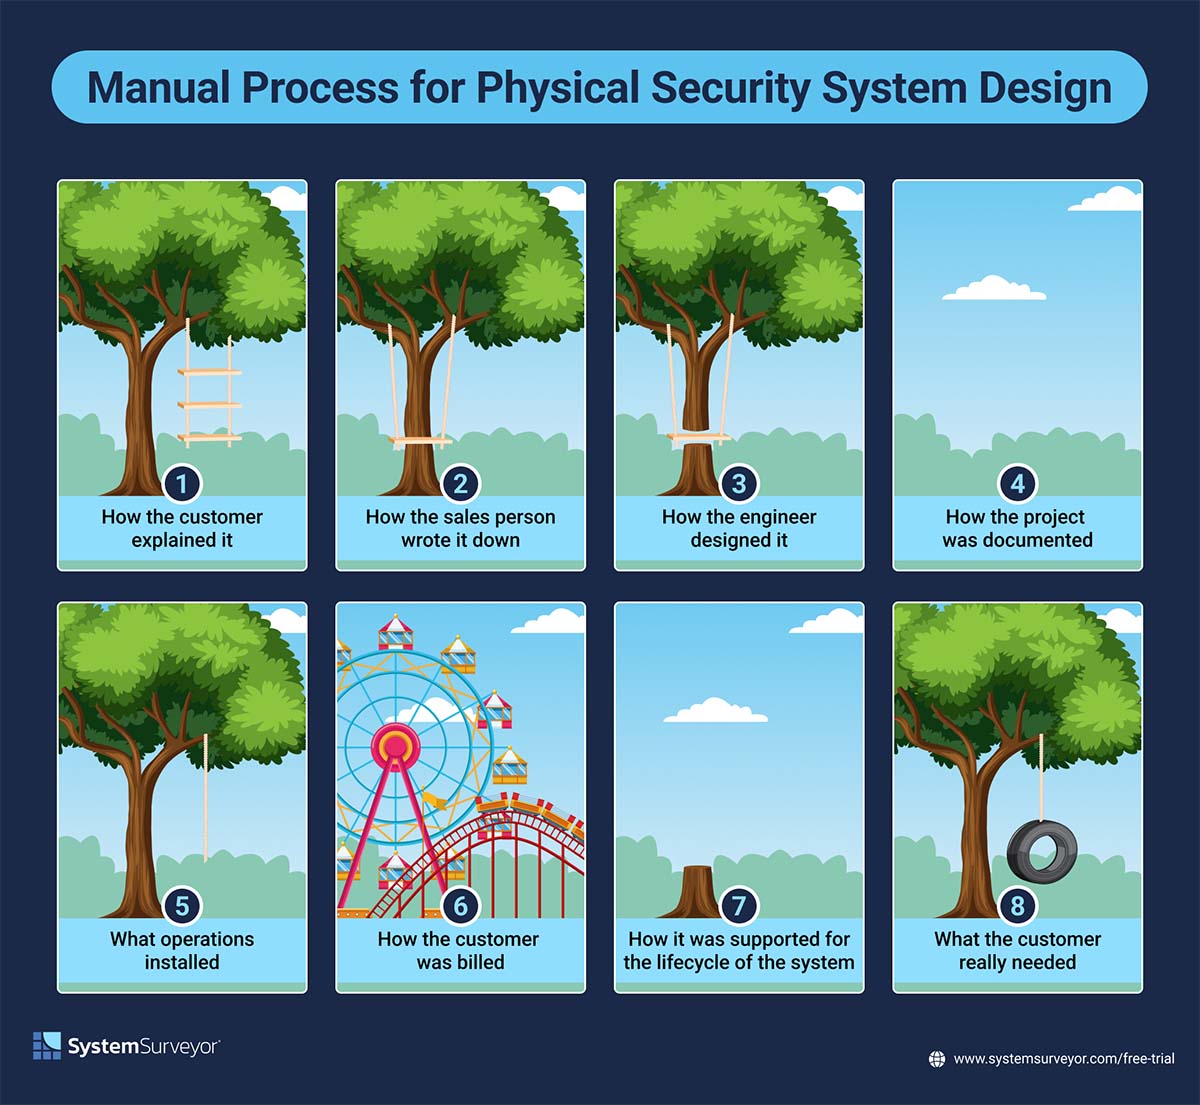 Manual Process for Physical Security System Design